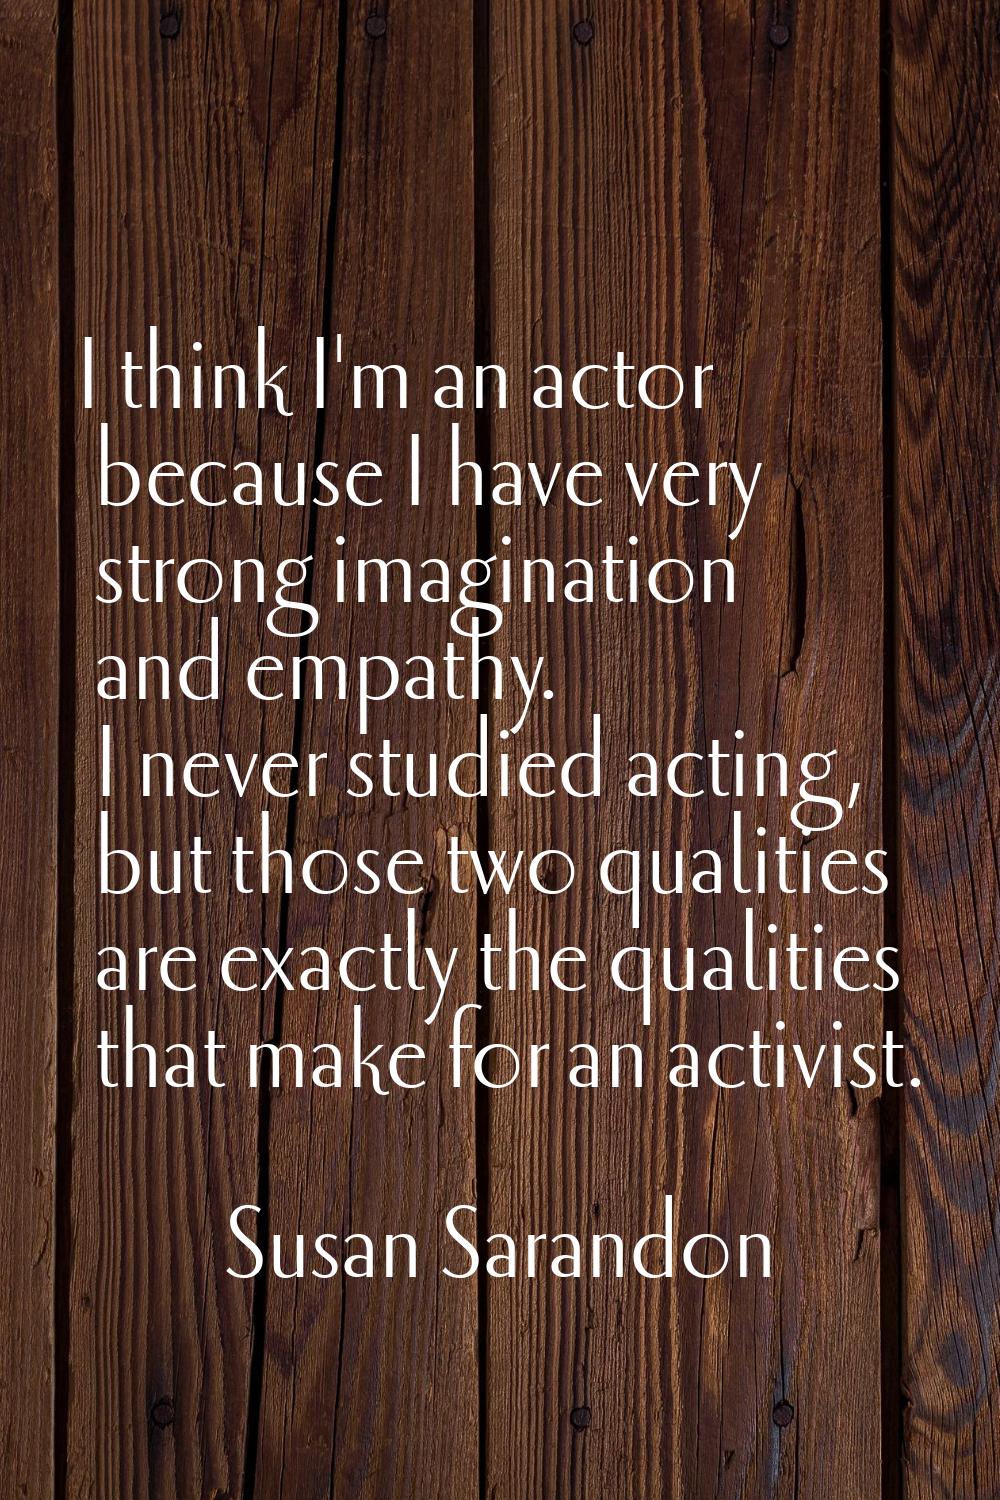 I think I'm an actor because I have very strong imagination and empathy. I never studied acting, bu